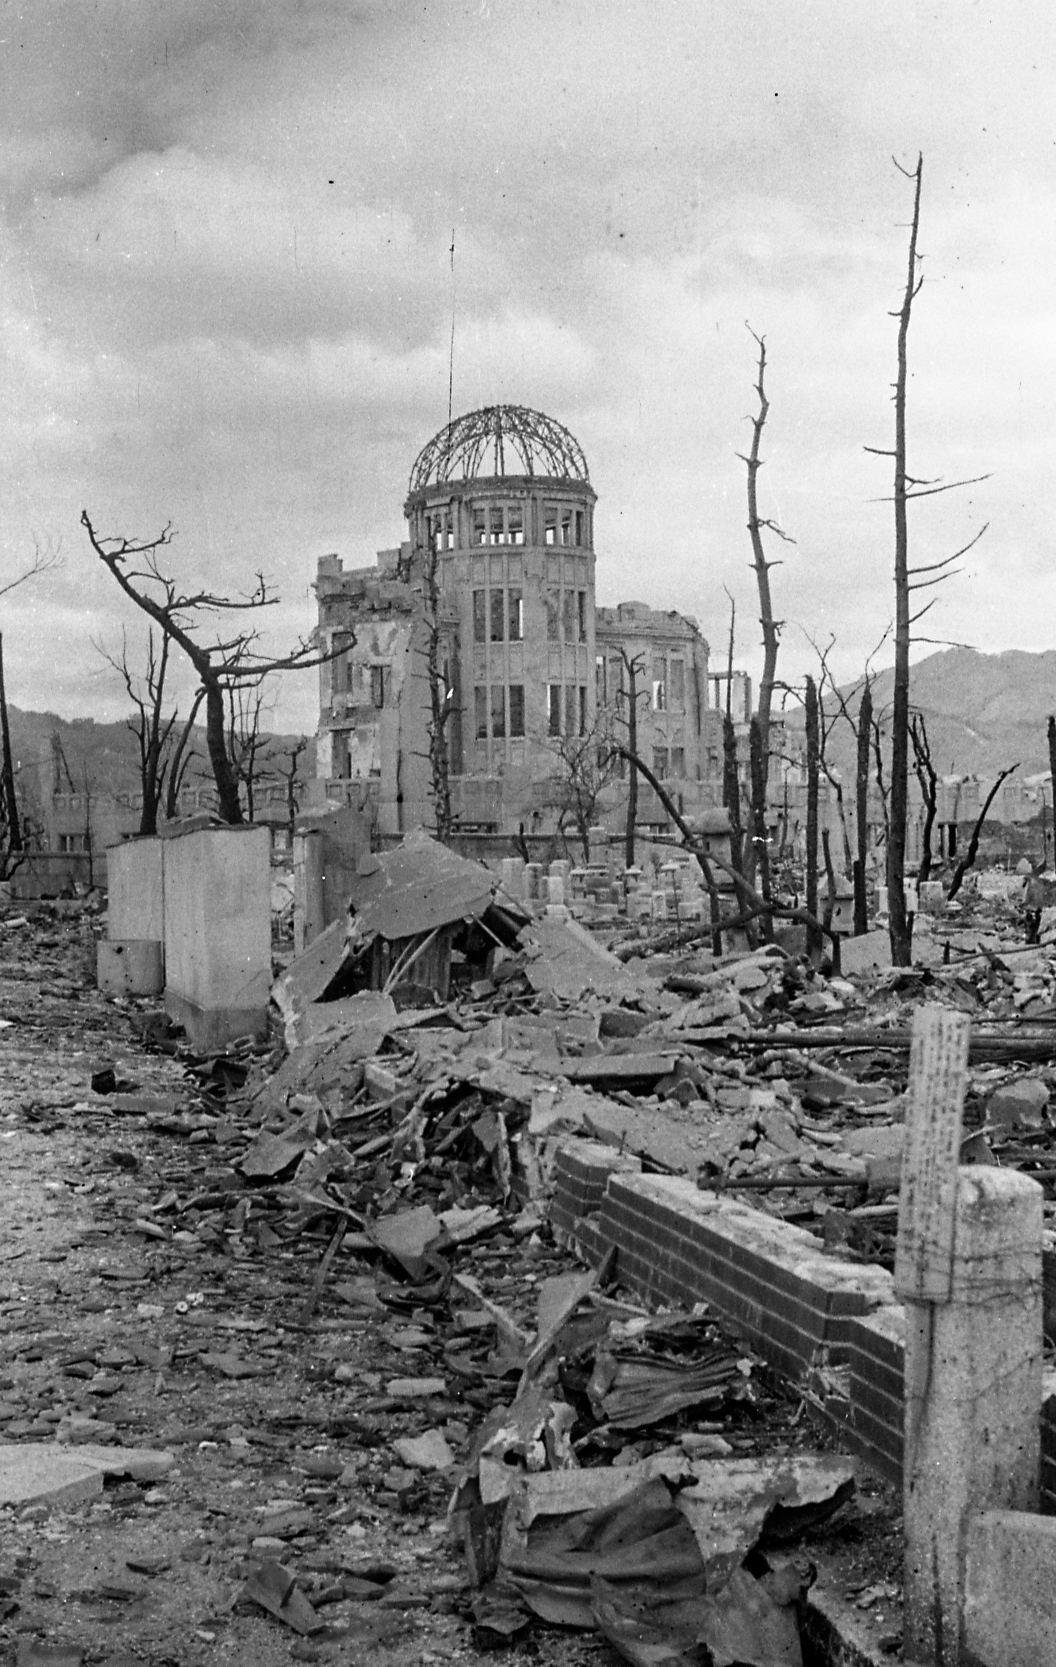 The atomic bomb dropped on Hiroshima on August 6, 1945 destroyed the area within two kilometres of the hypocentre.